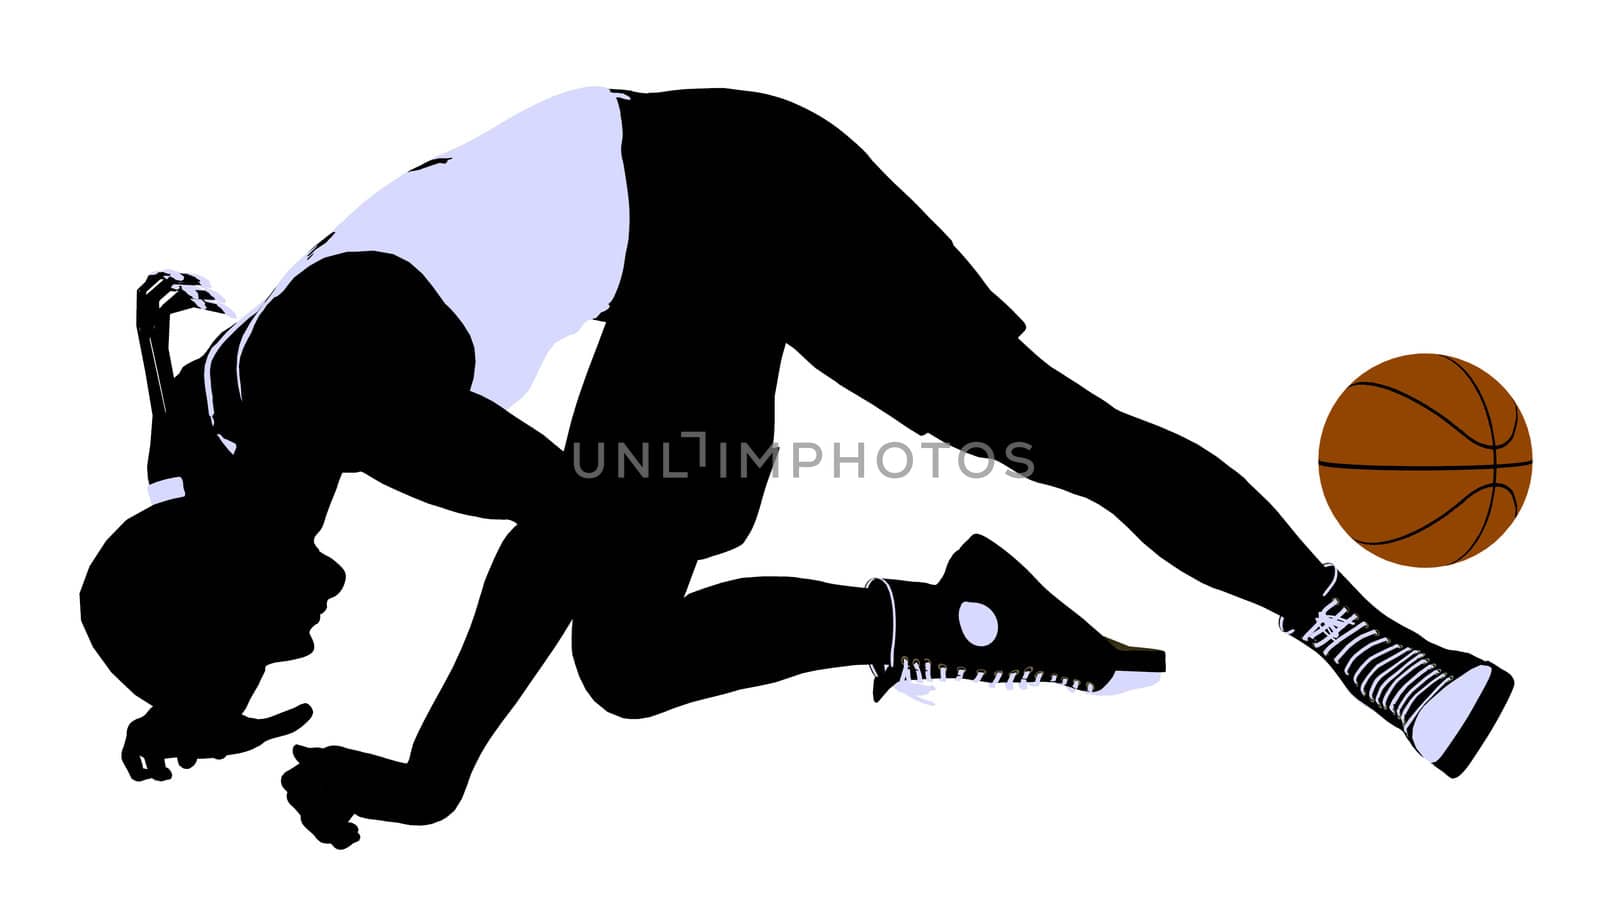 African American Basketball Player Illustration Silhouette by kathygold